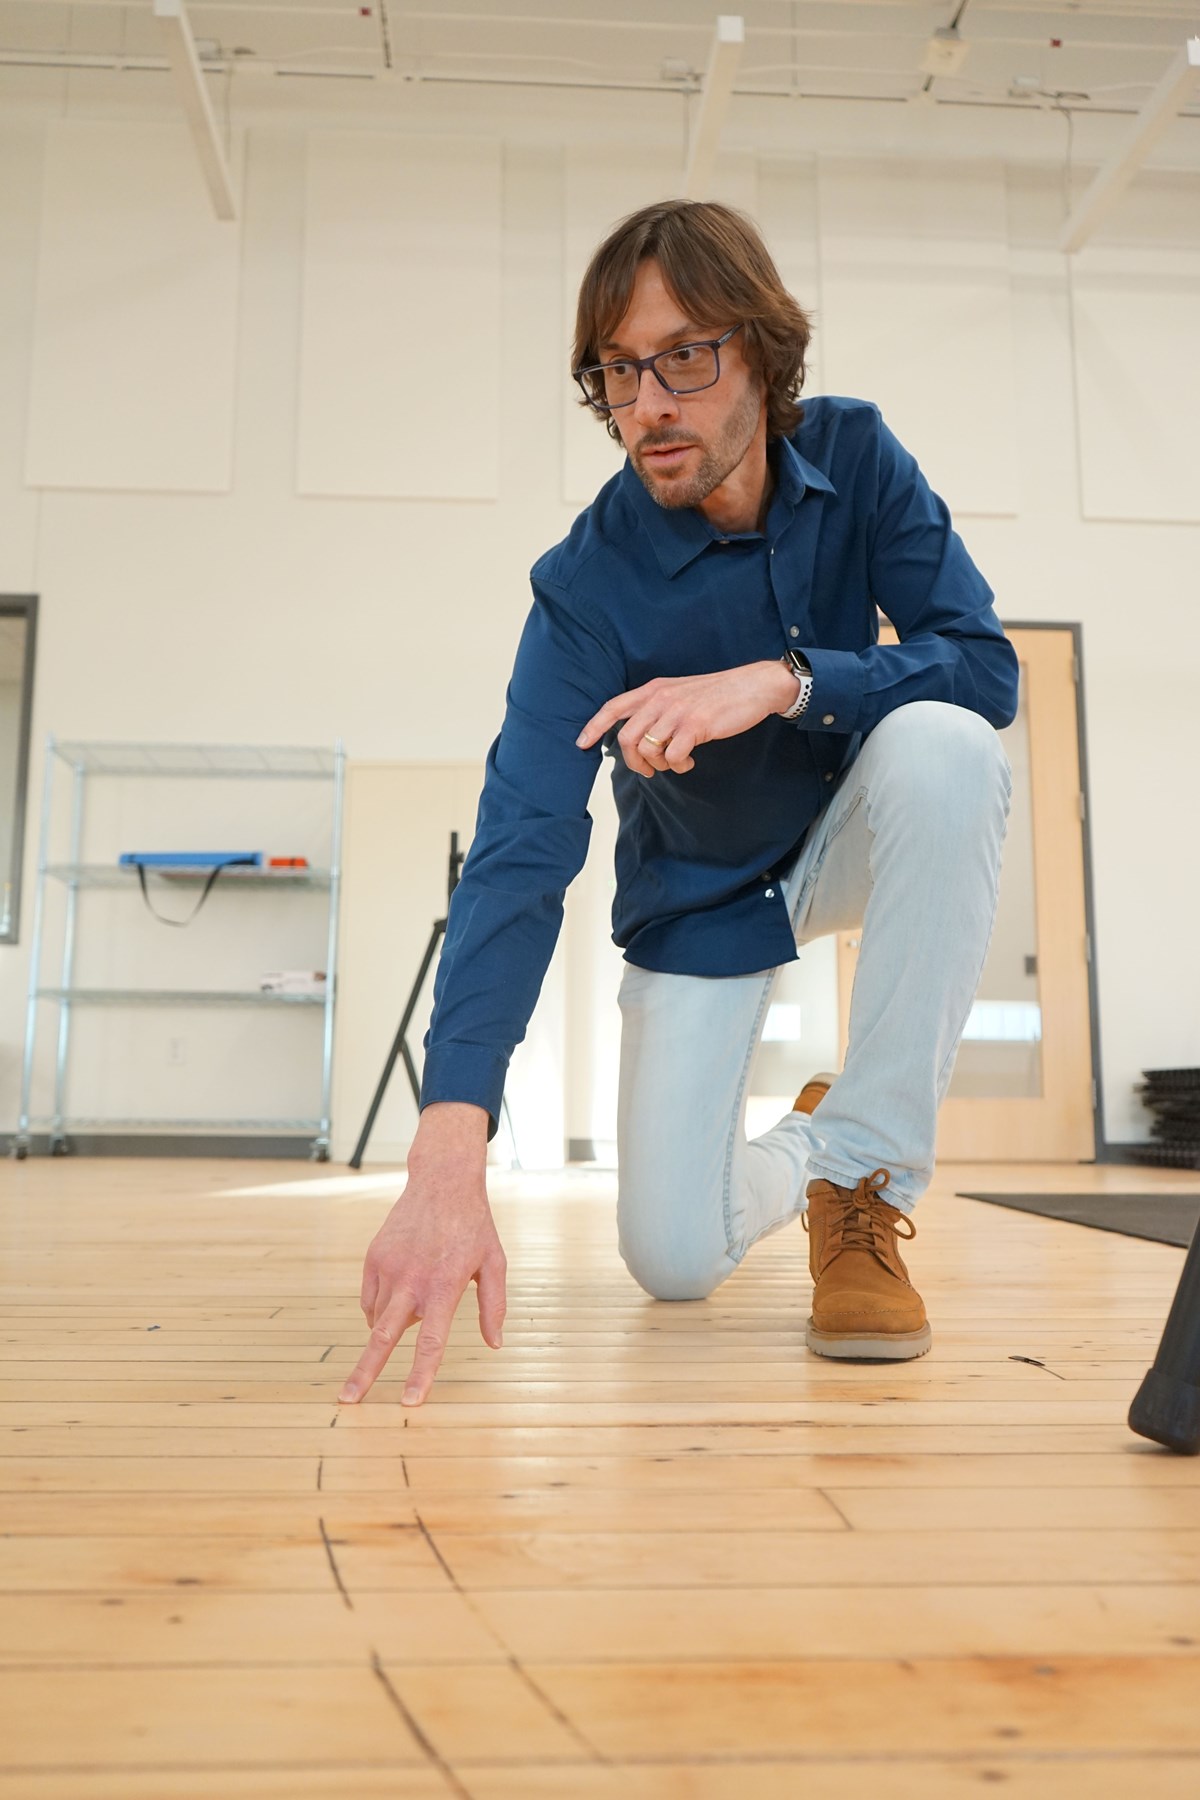 A man wearing glasses kneels on a hardwood floor and touches faint lines with his fingers